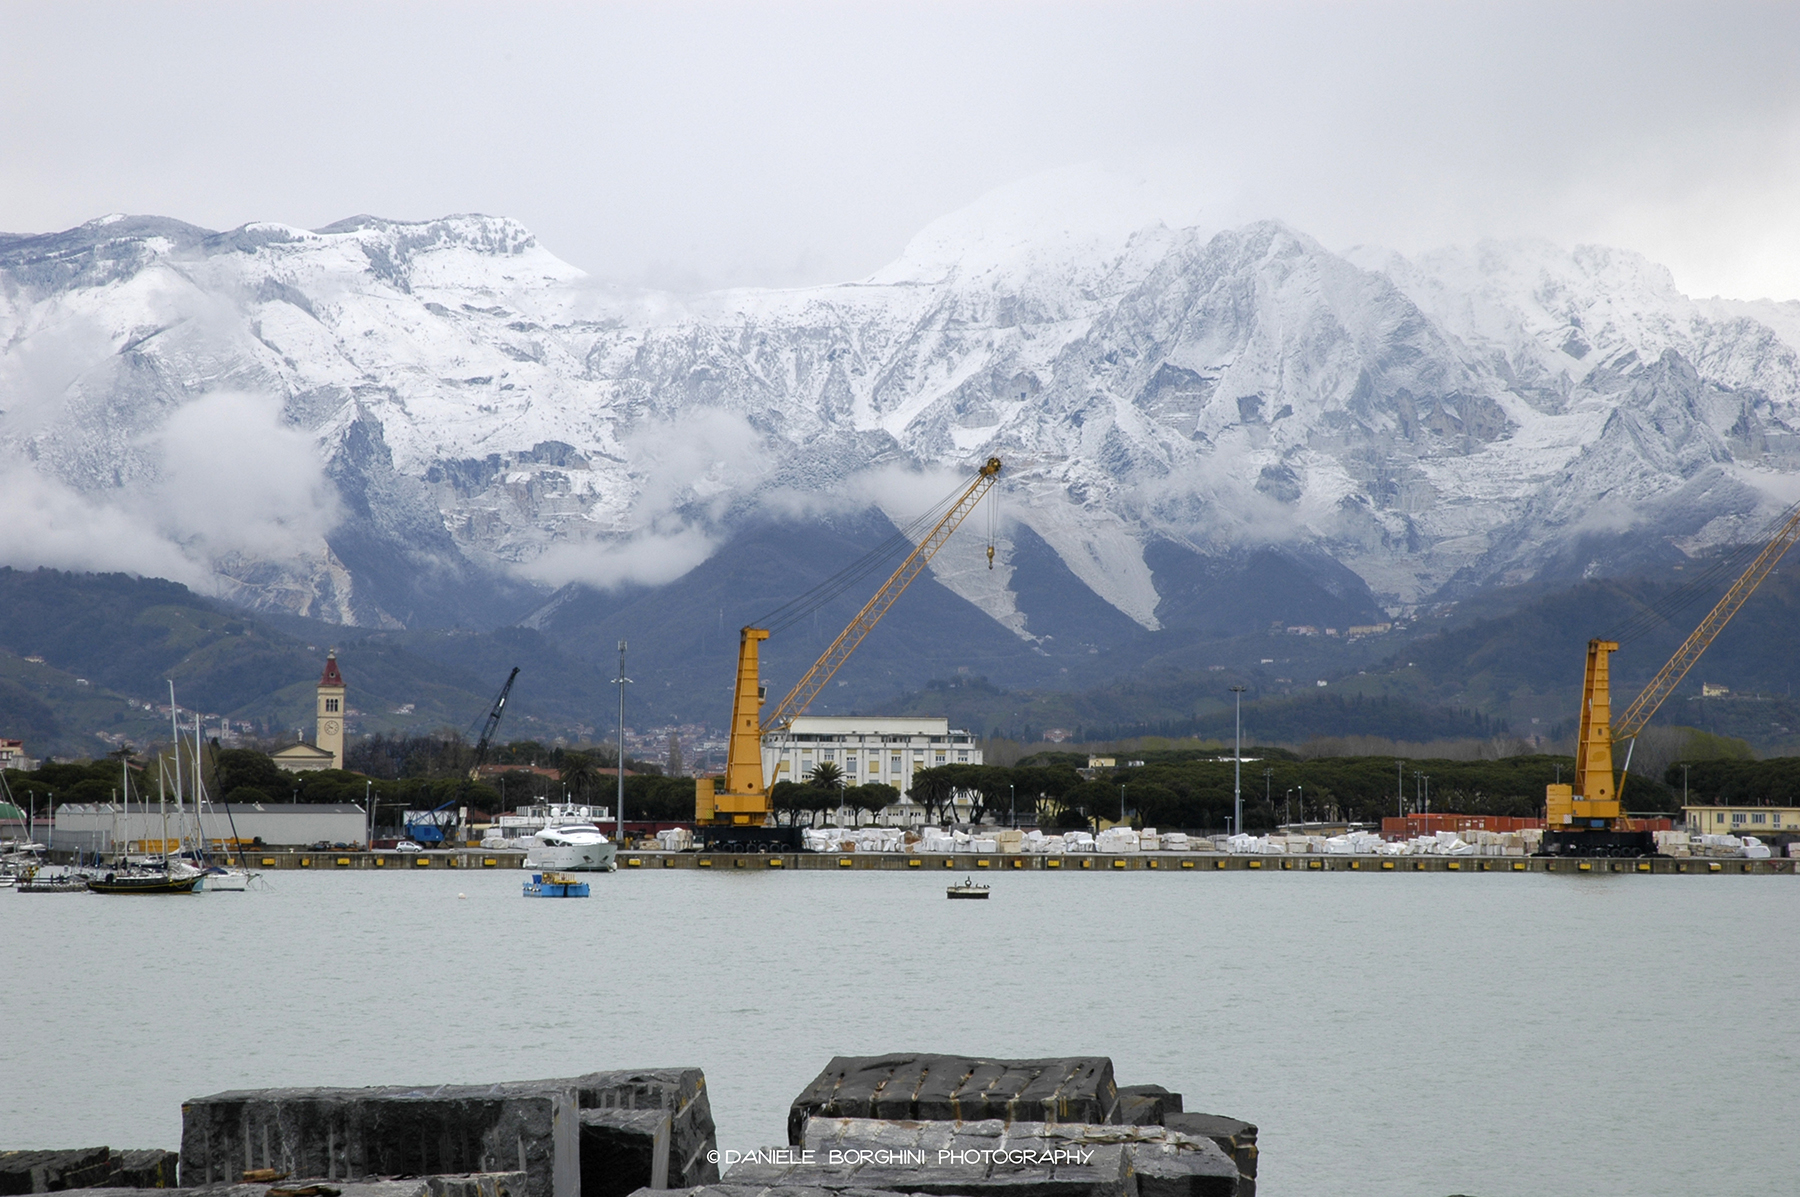 The port and the Apuan Alps...